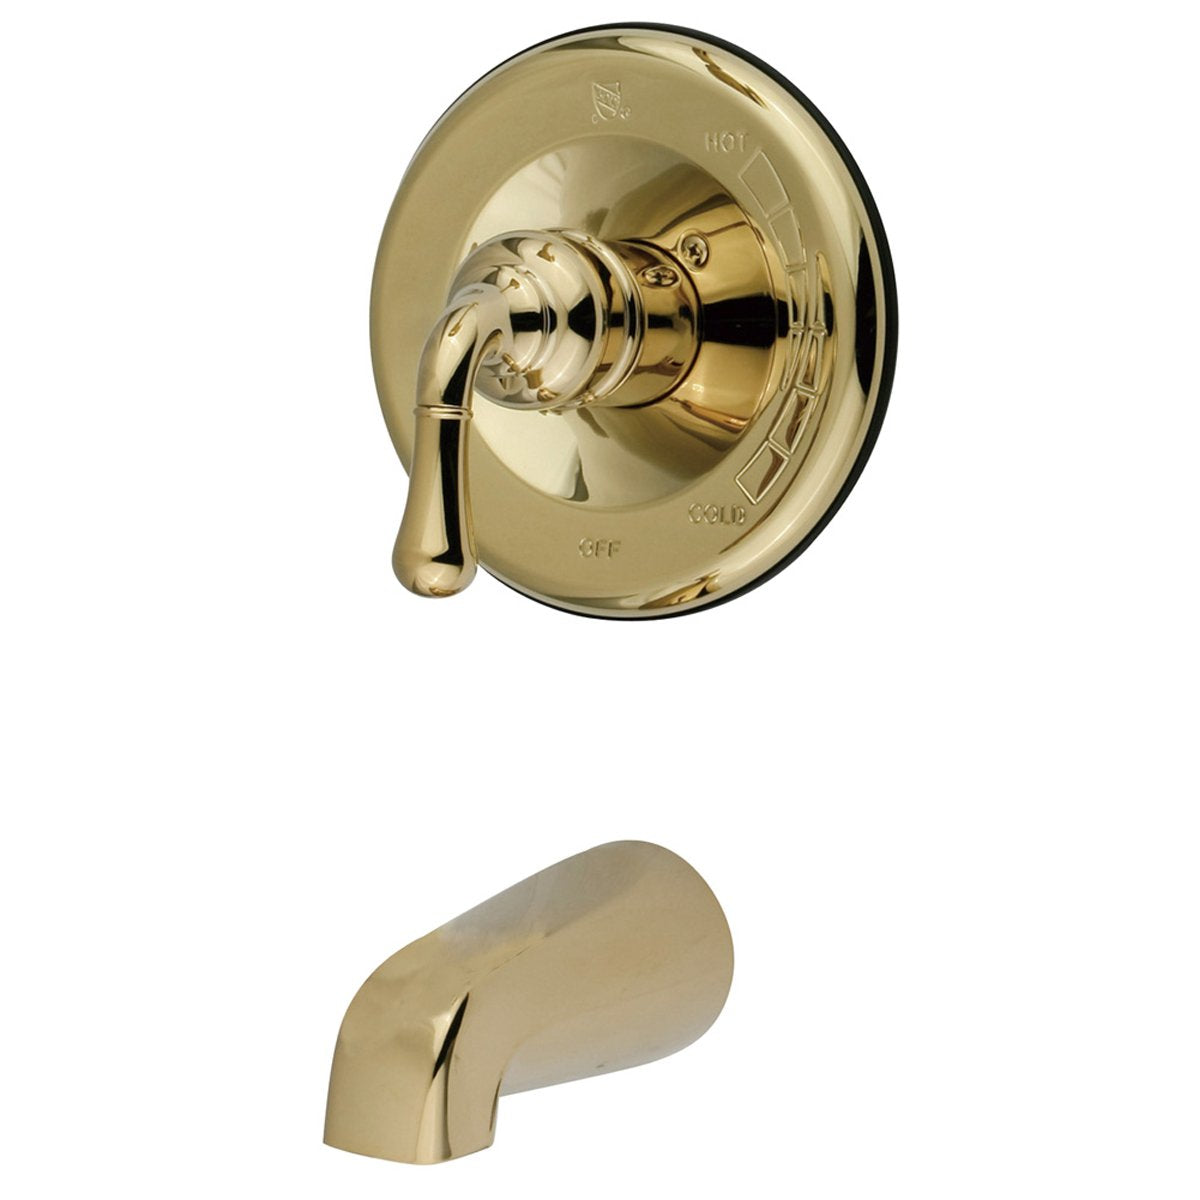 Kingston Brass Magellan Single Handle Tub Faucet in Polished Brass-Tub Faucets-Free Shipping-Directsinks.